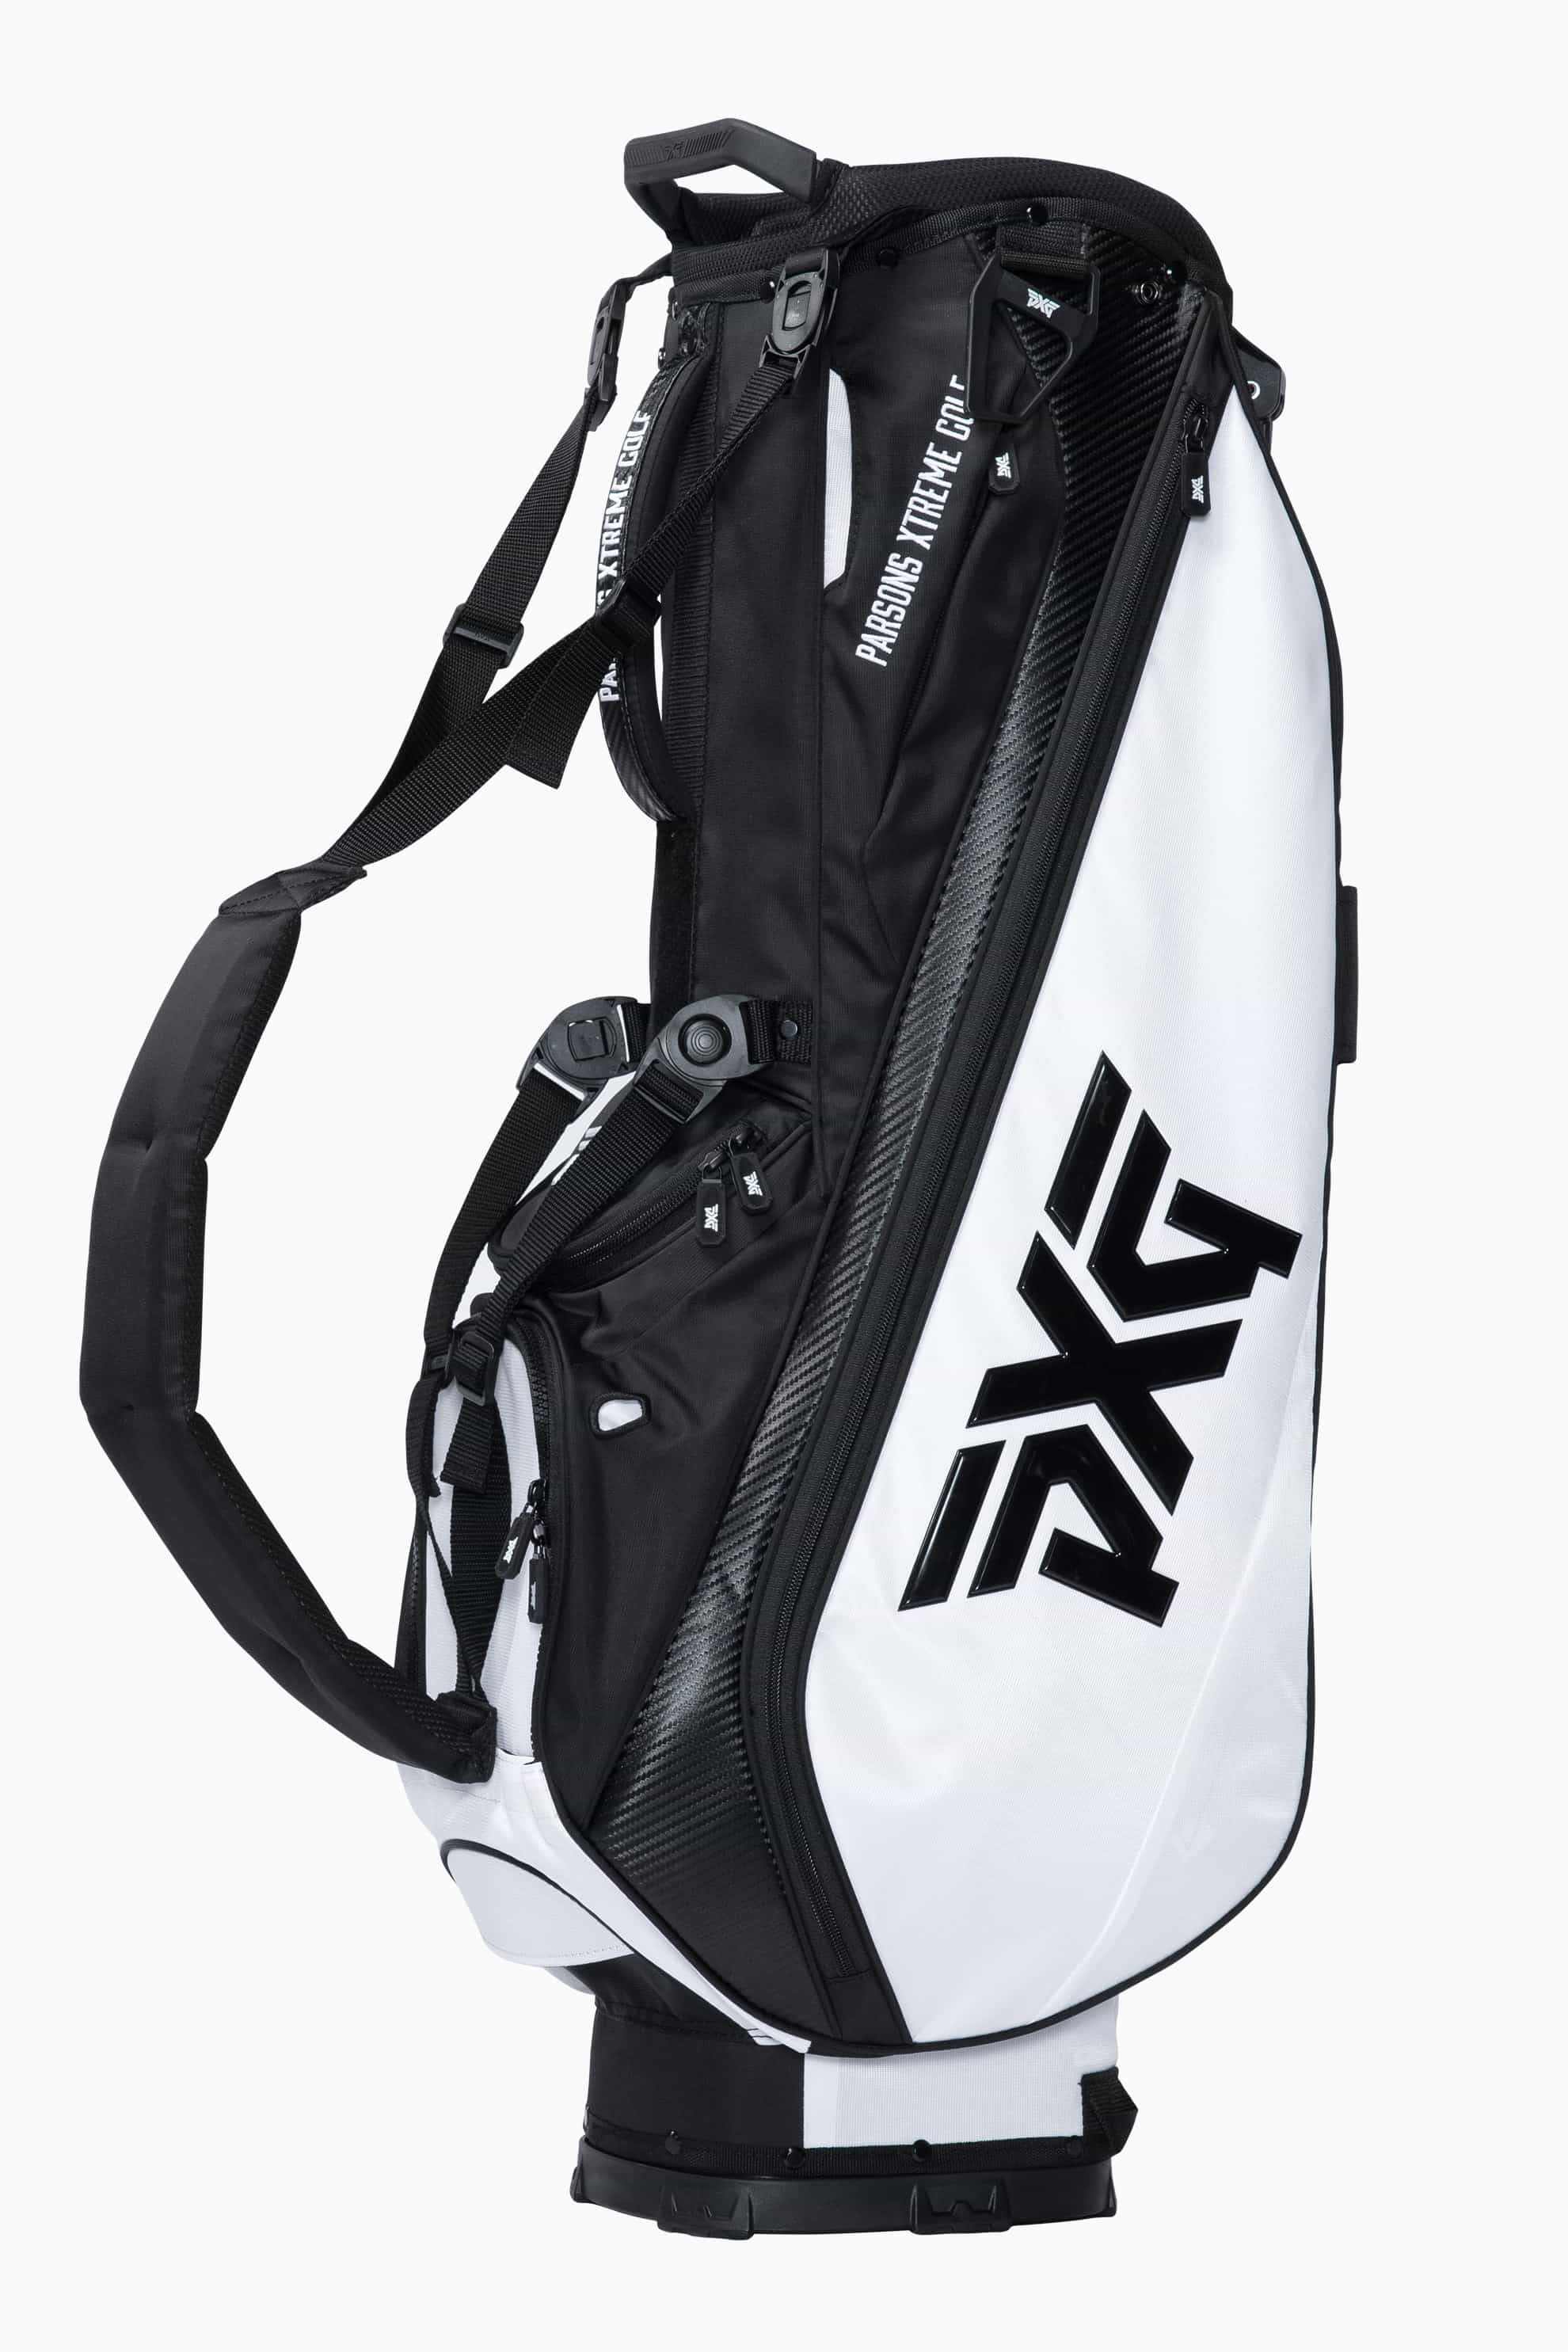 Perfect Practice PPLX Stand Golf Bag - White | Perfect Practice